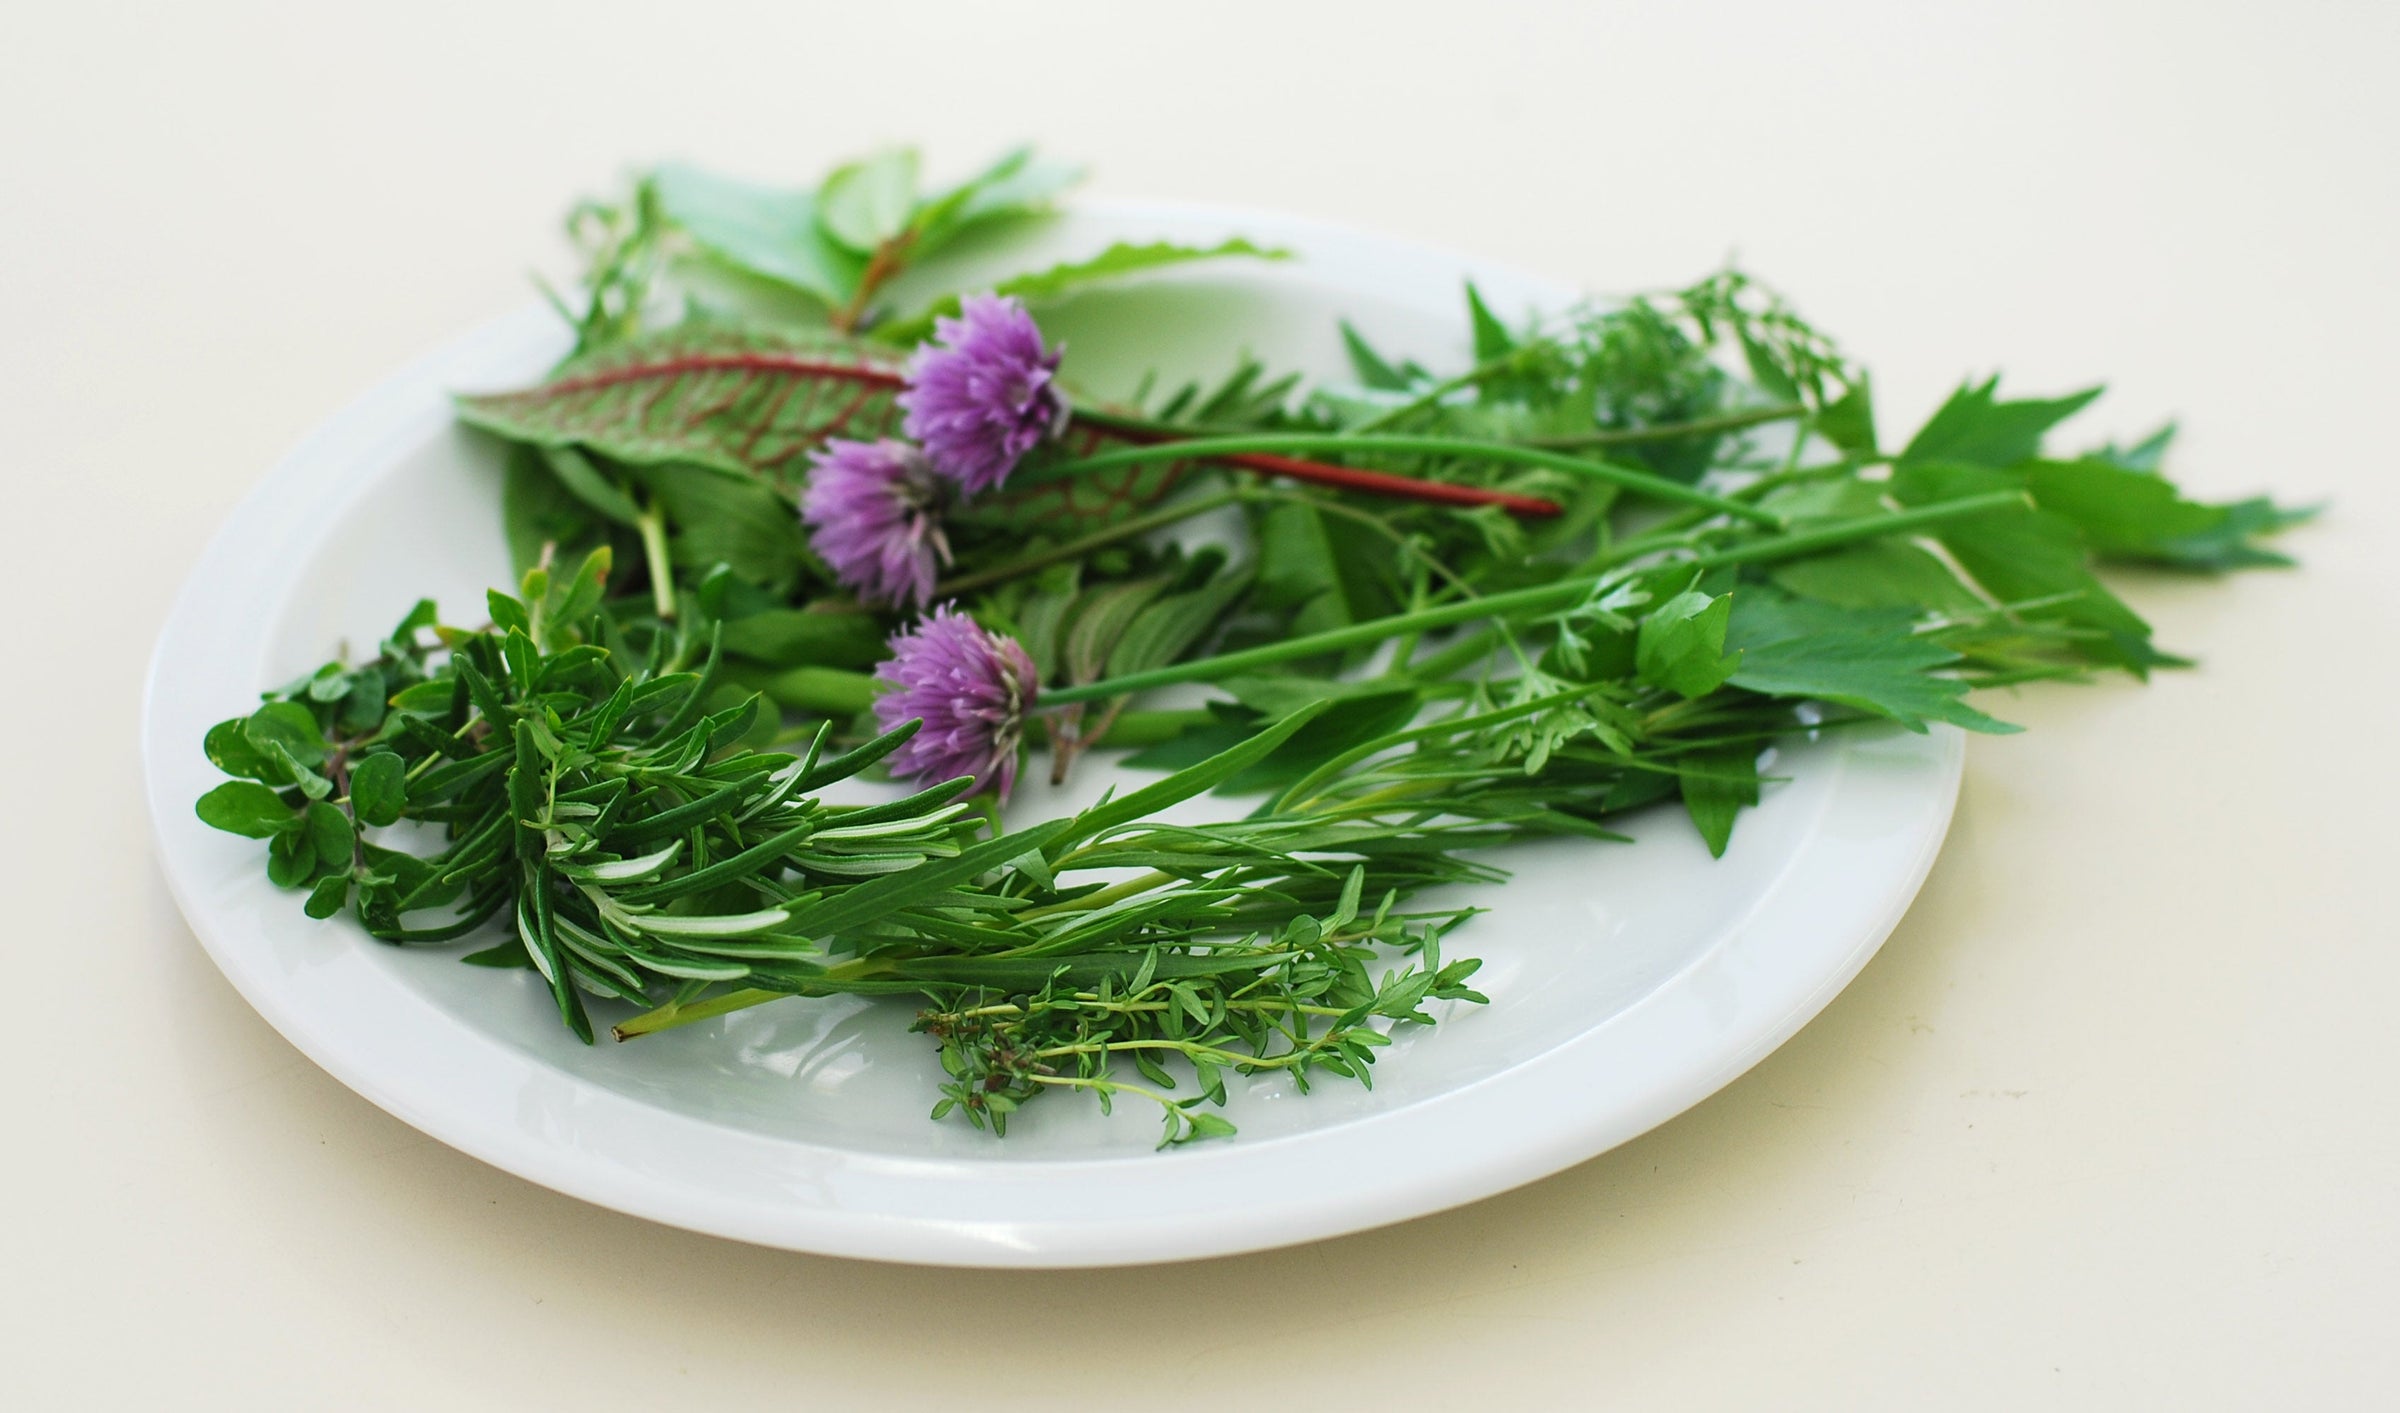 culinary and medicinal herb collections for you